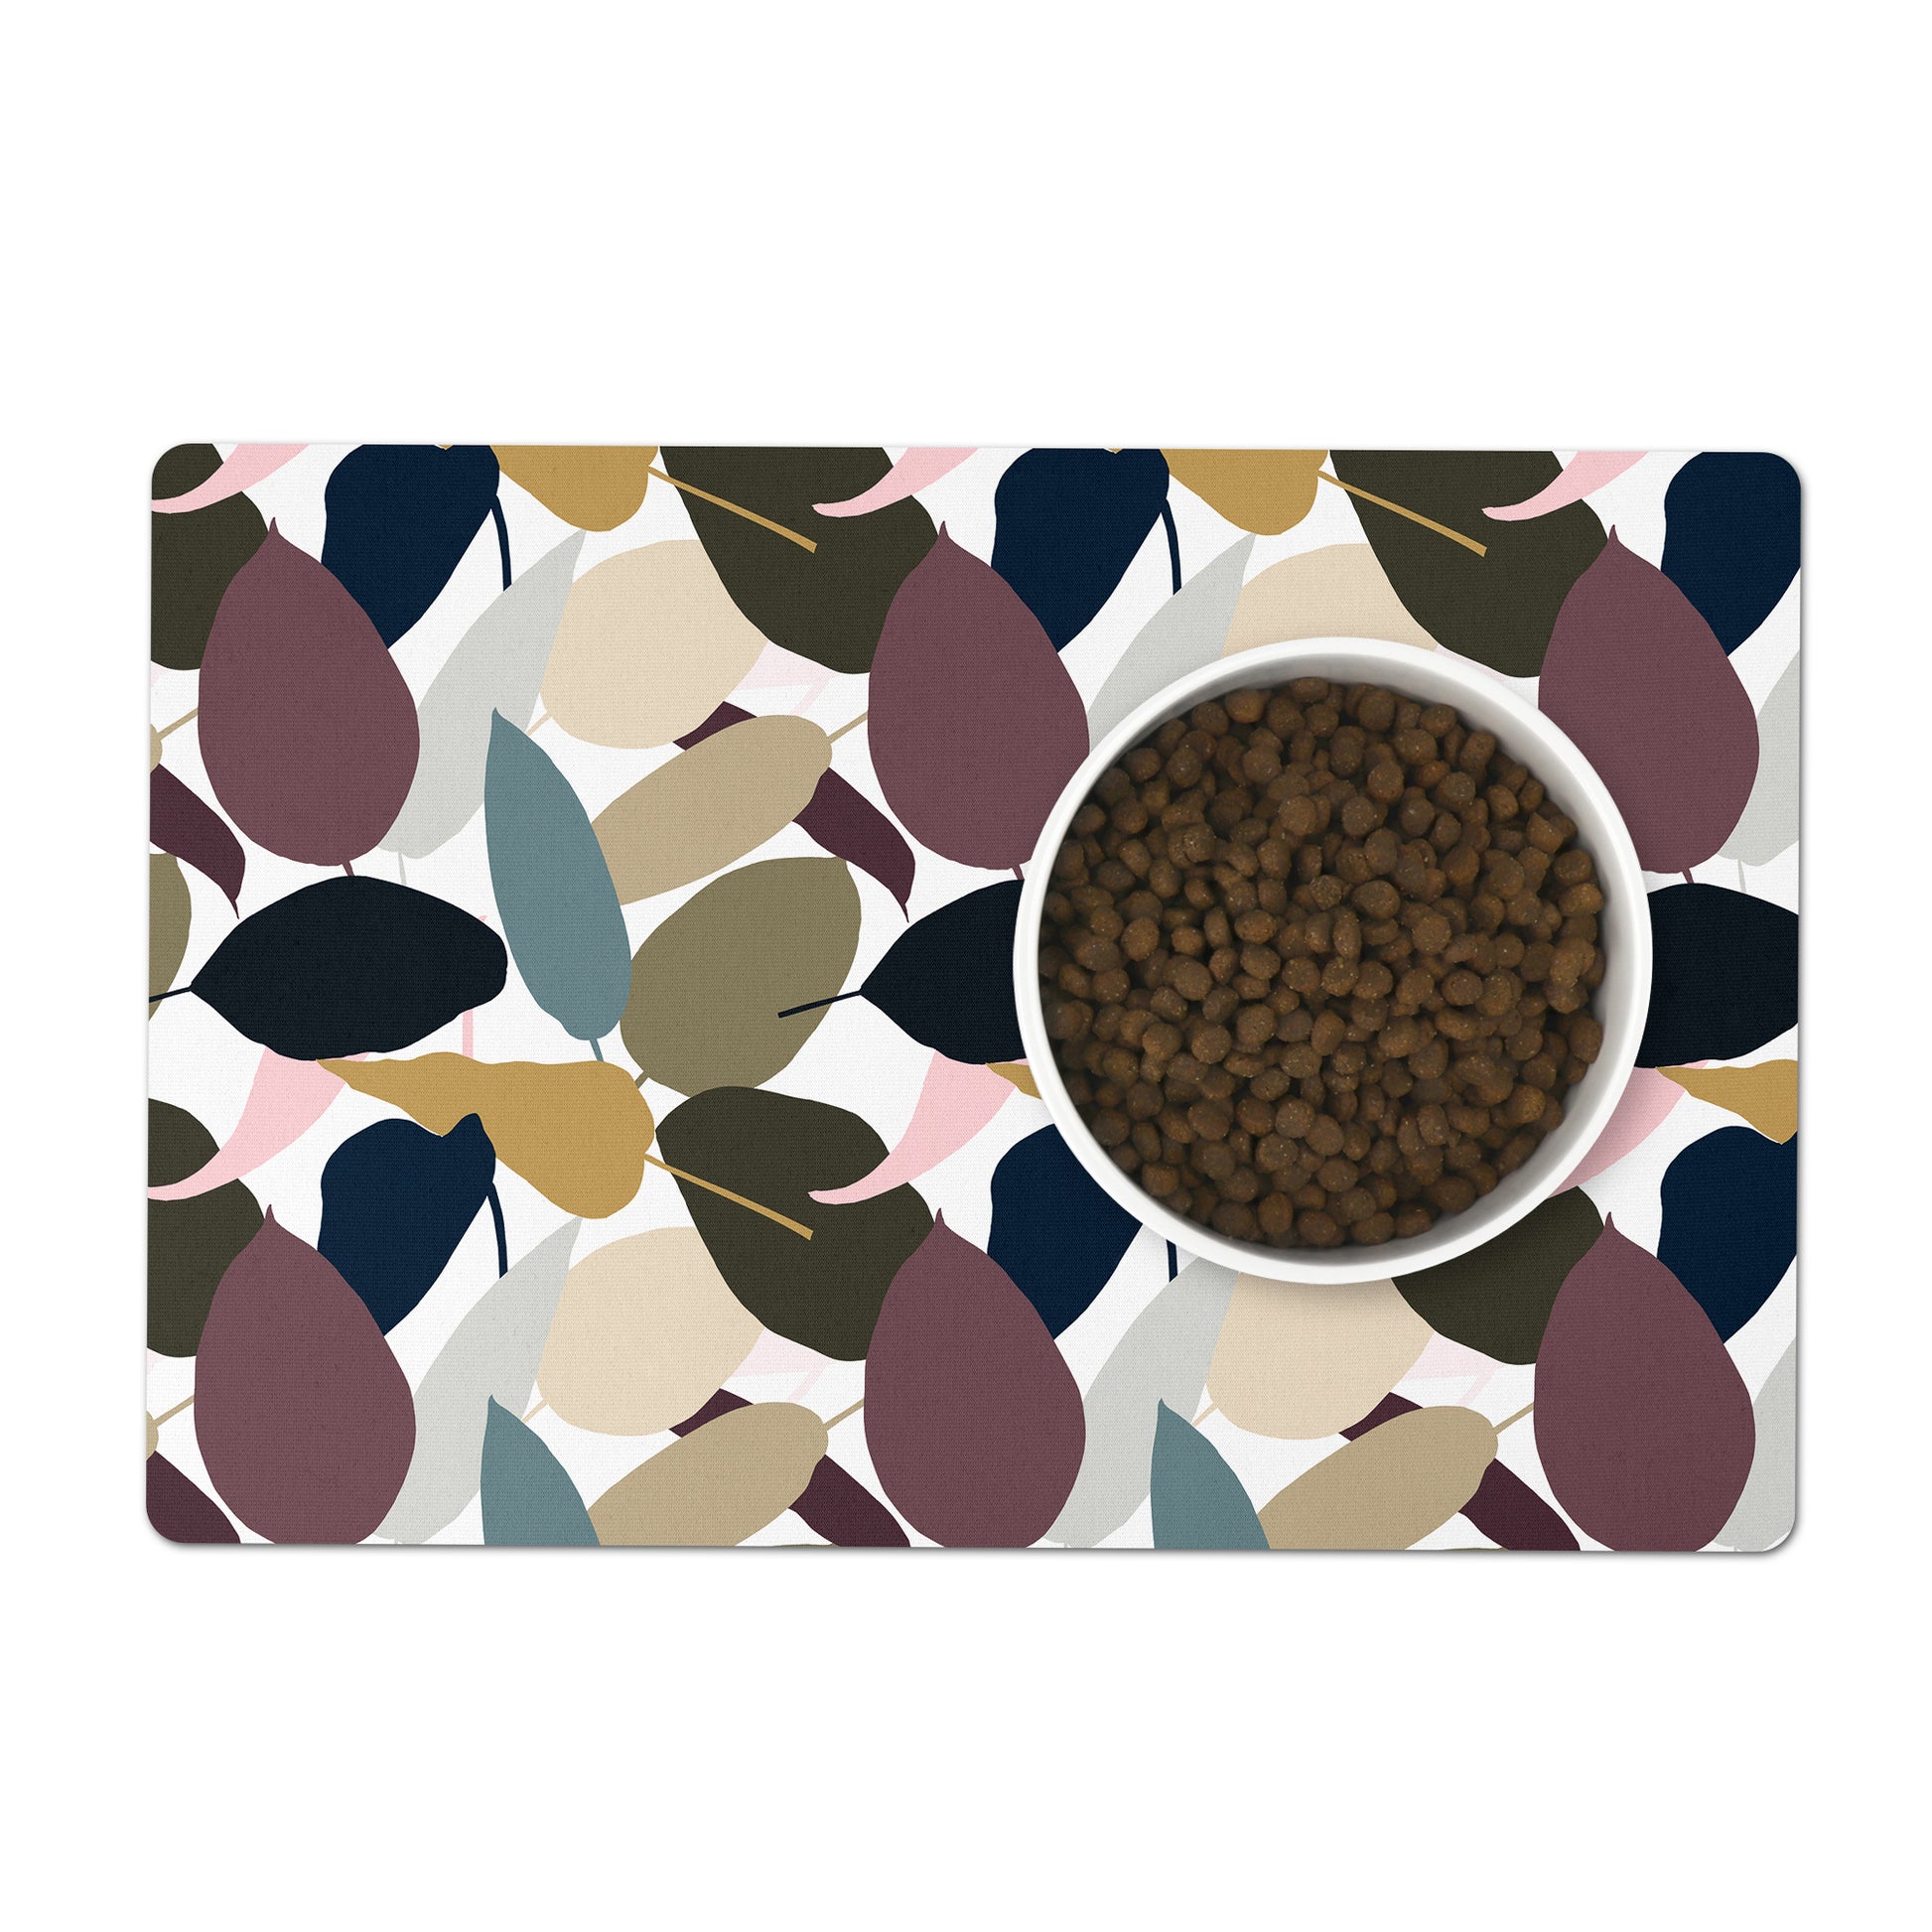 Designer pet bowl mat in gorgeous modern leaf shapes in rich earthy hues.